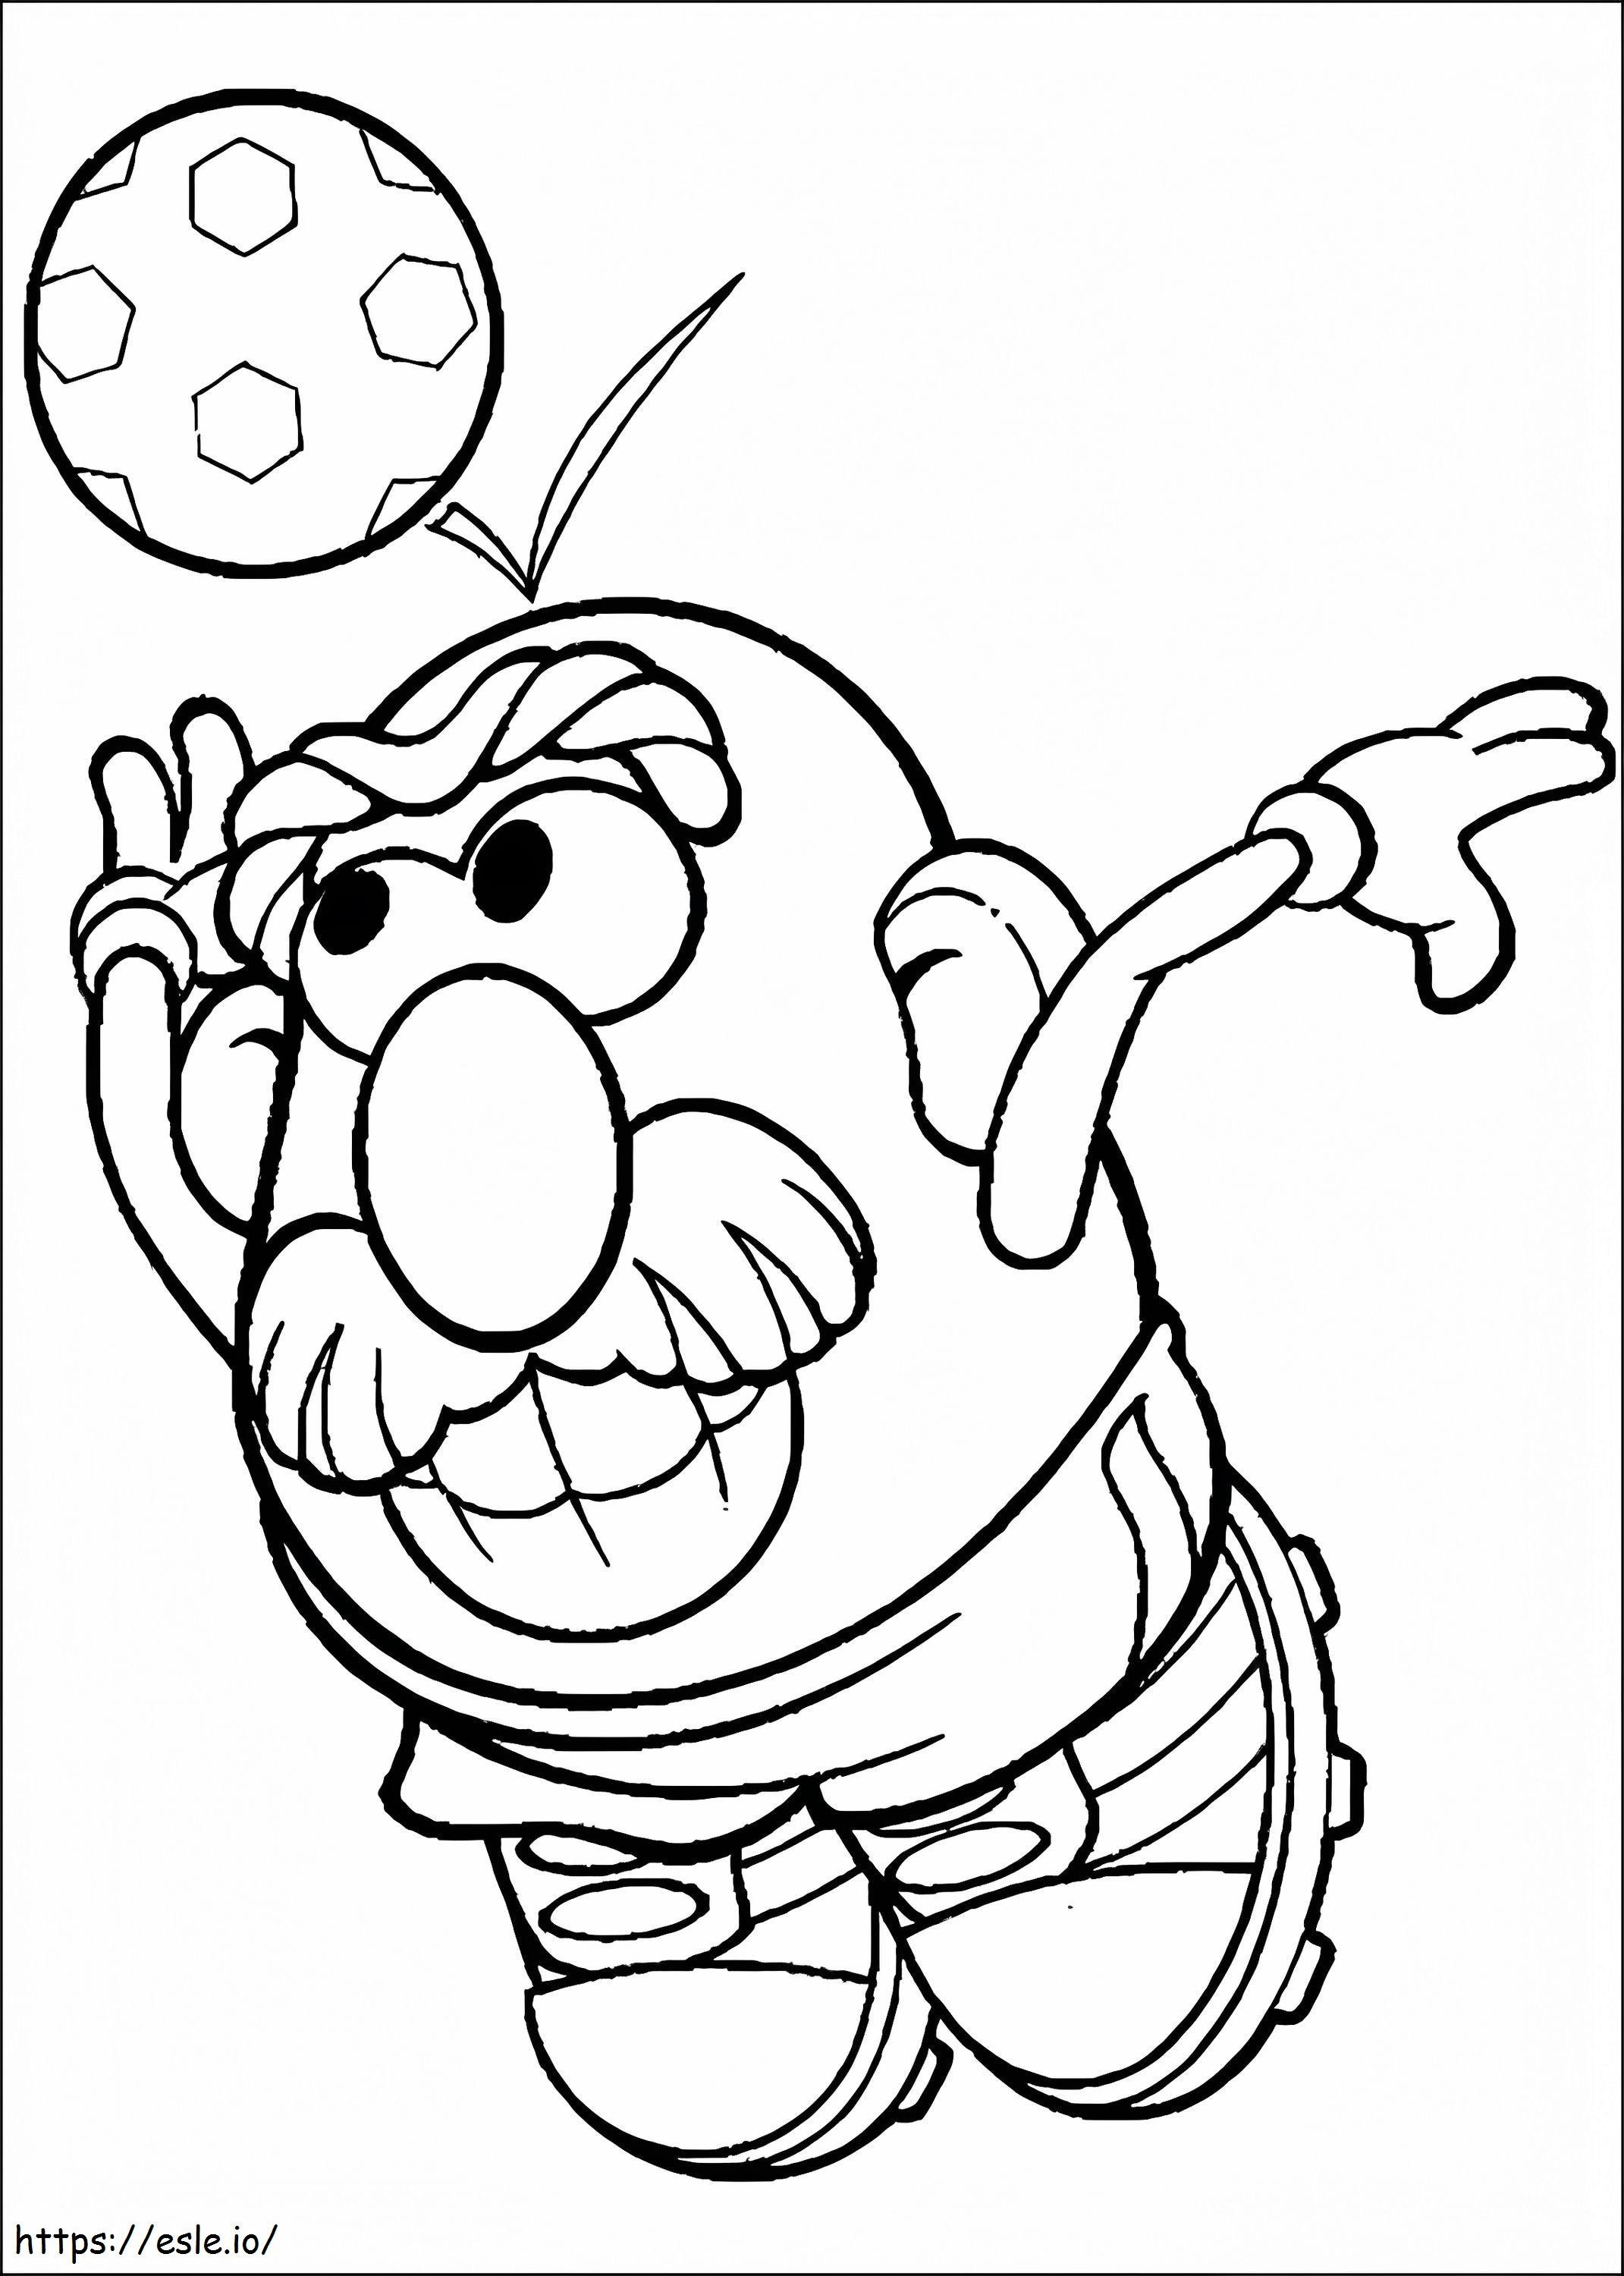 Mr. Potato Head Playing Soccer coloring page